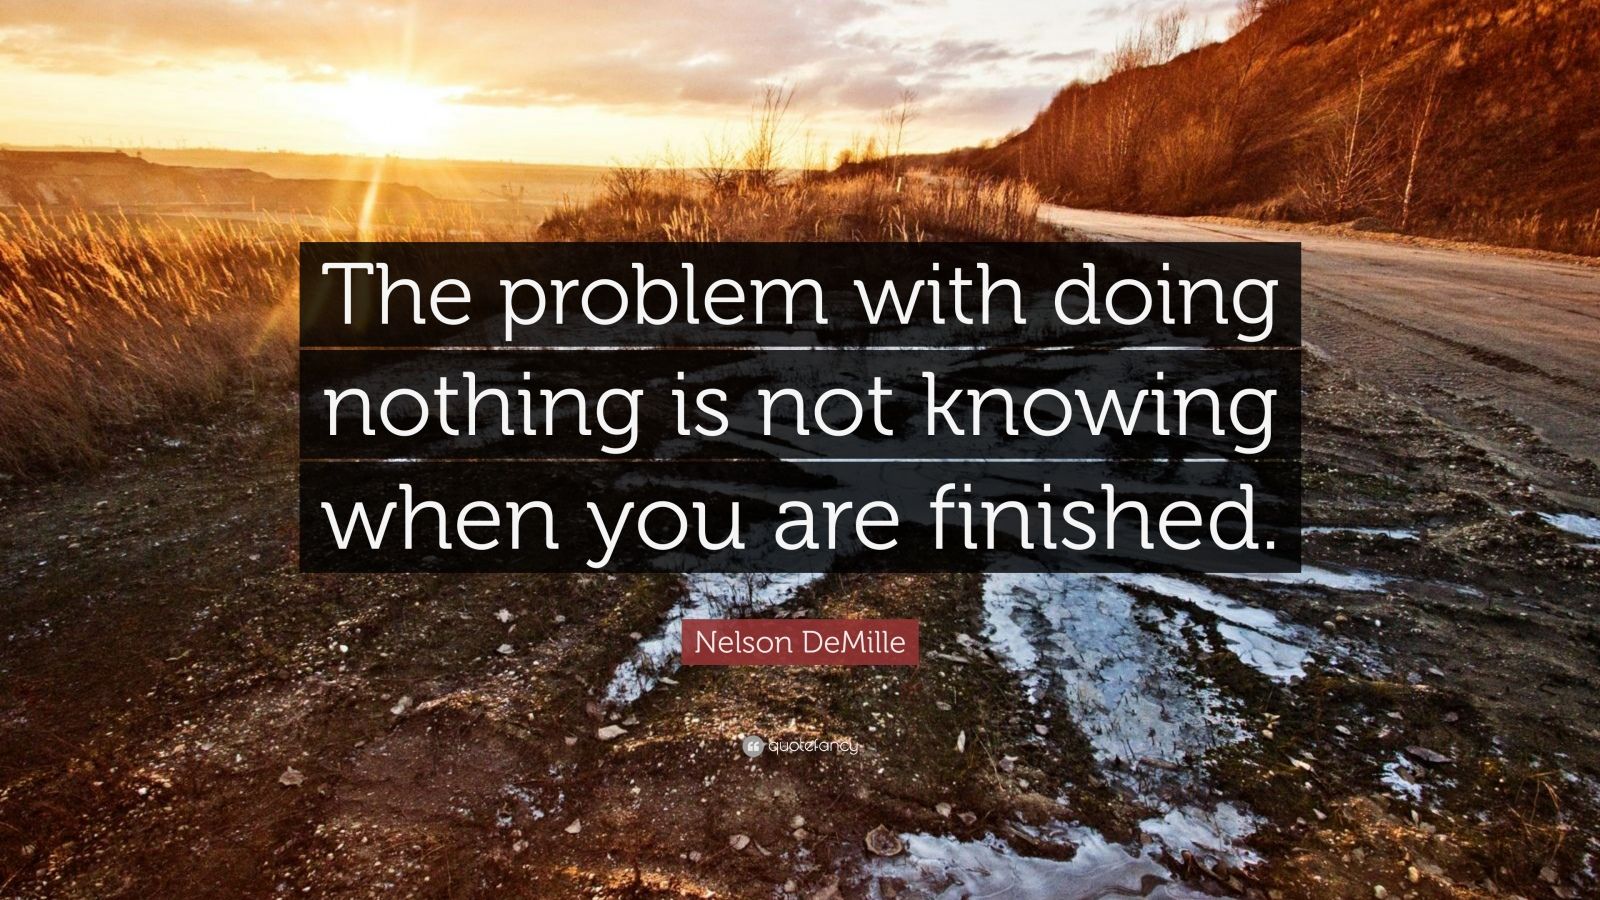 Nelson DeMille Quote: “The problem with doing nothing is not knowing ...